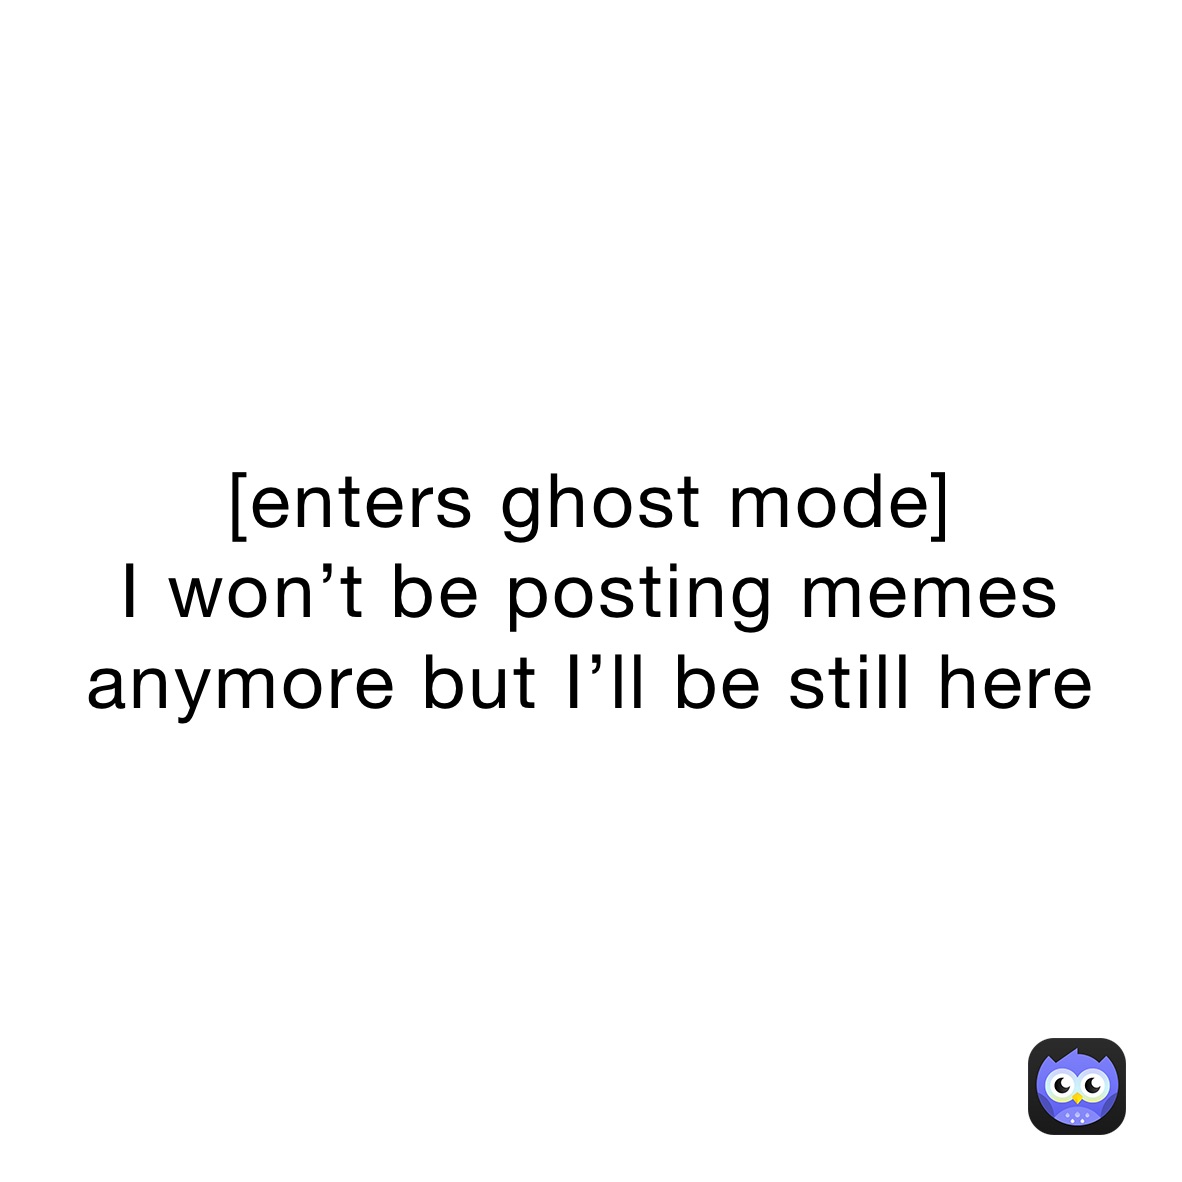 [enters ghost mode]
I won’t be posting memes anymore but I’ll be still here